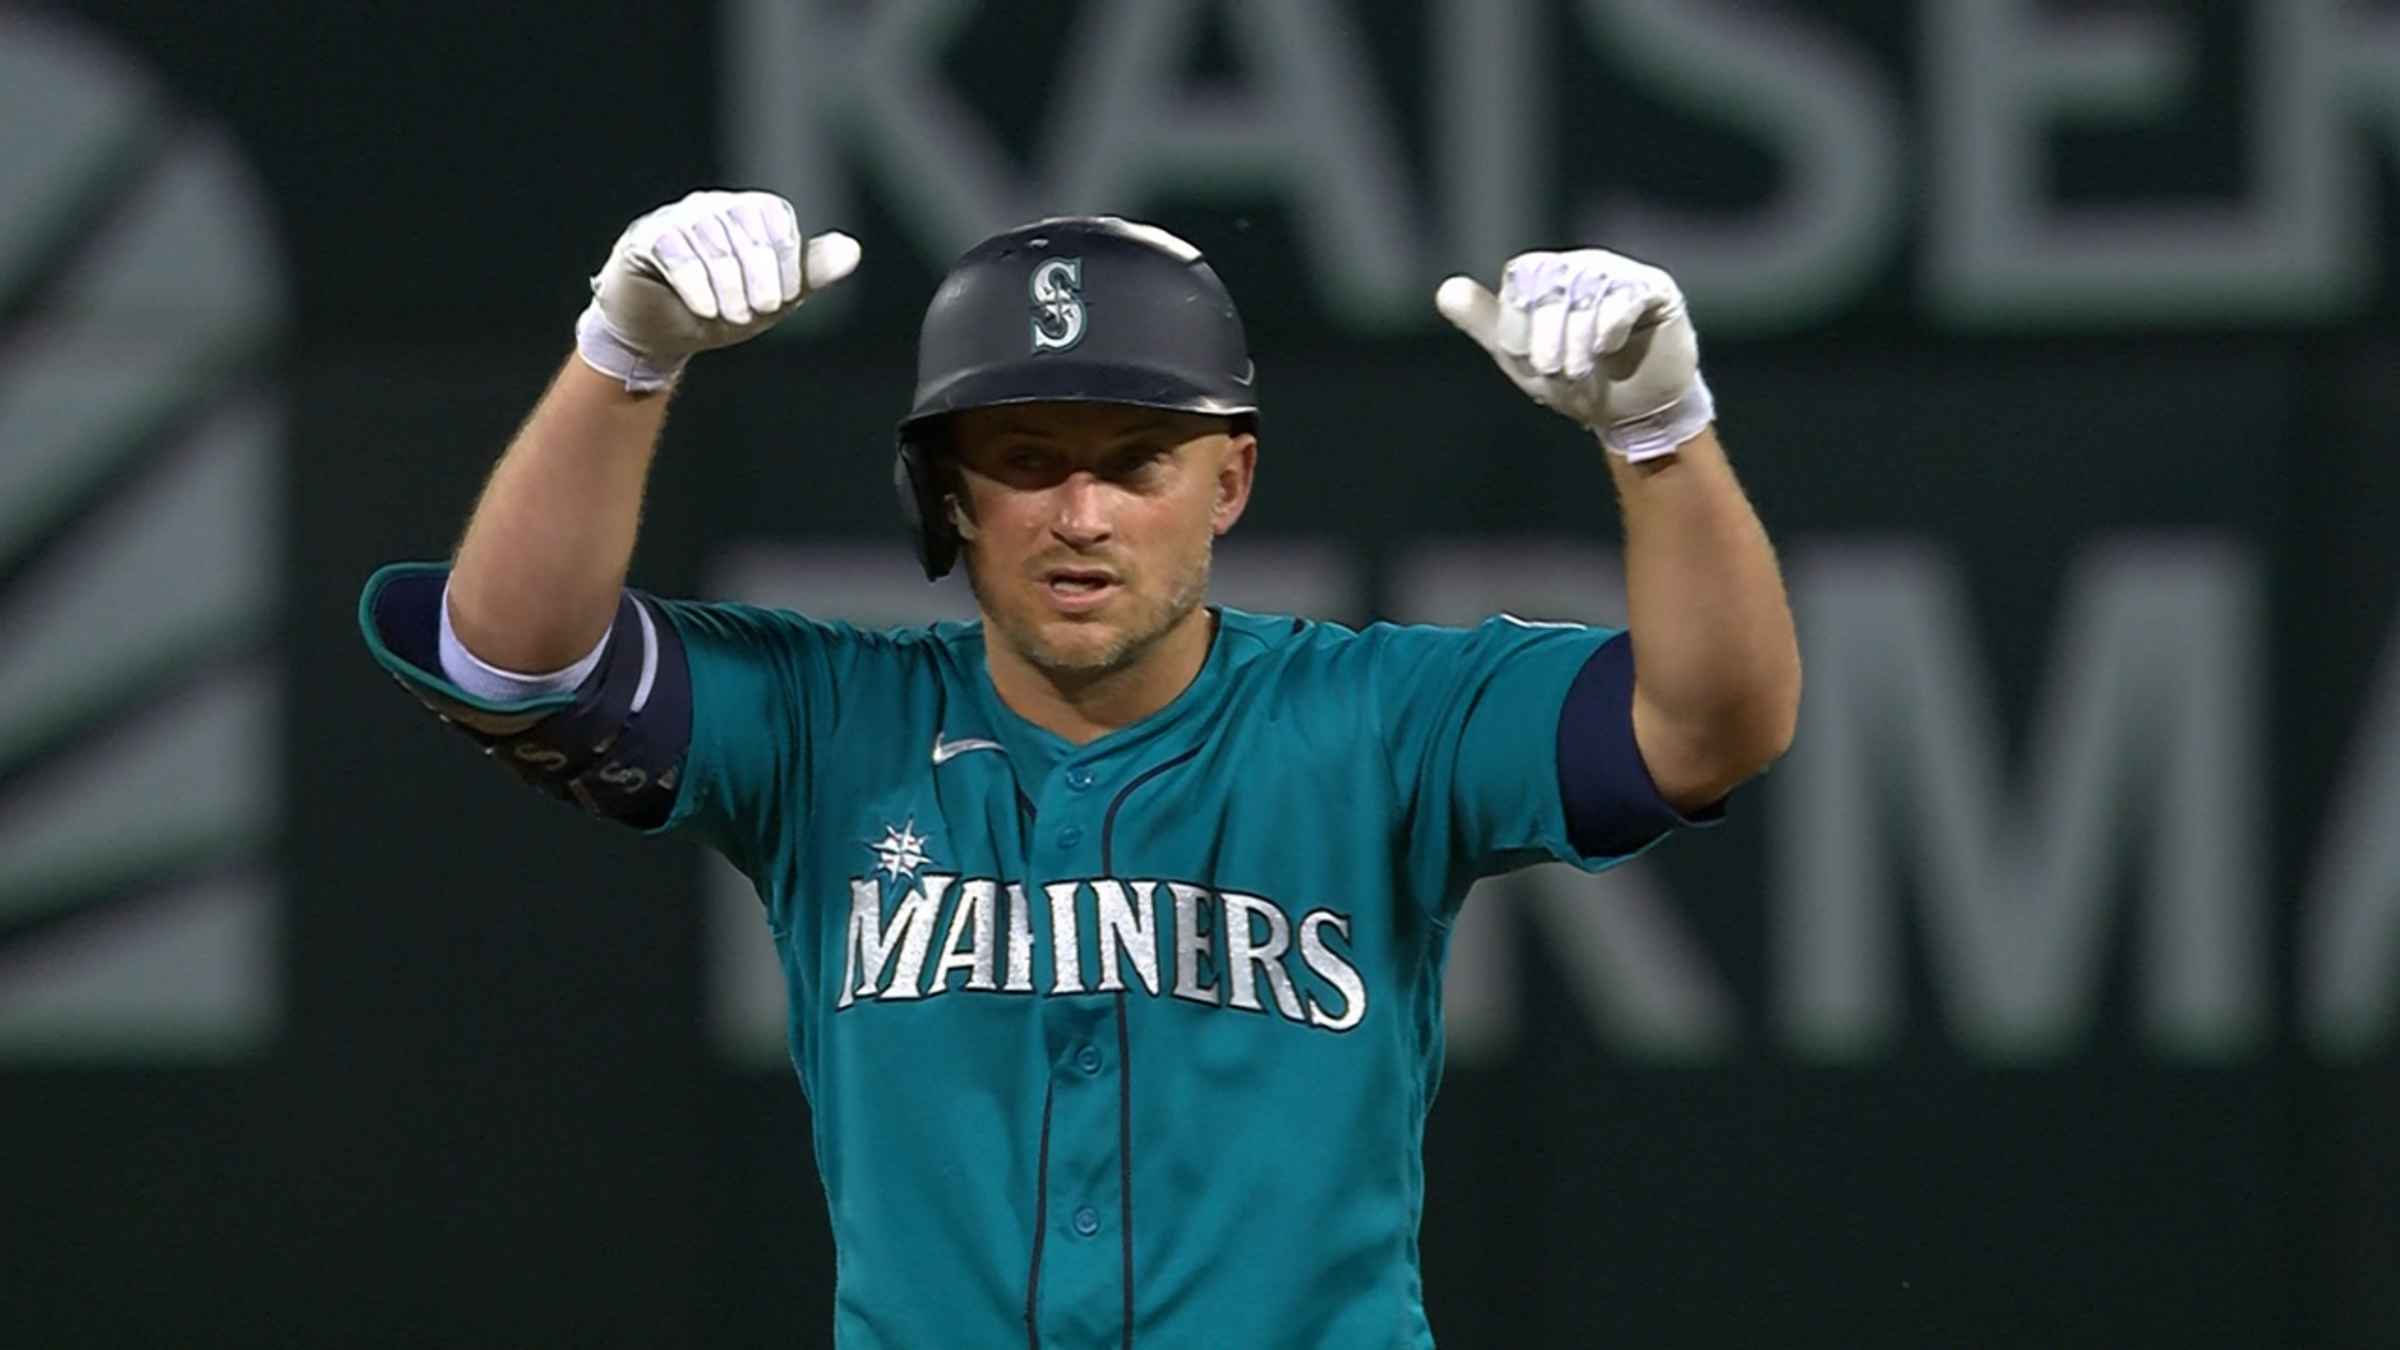 Kyle Seager's 300th career double, 08/19/2021